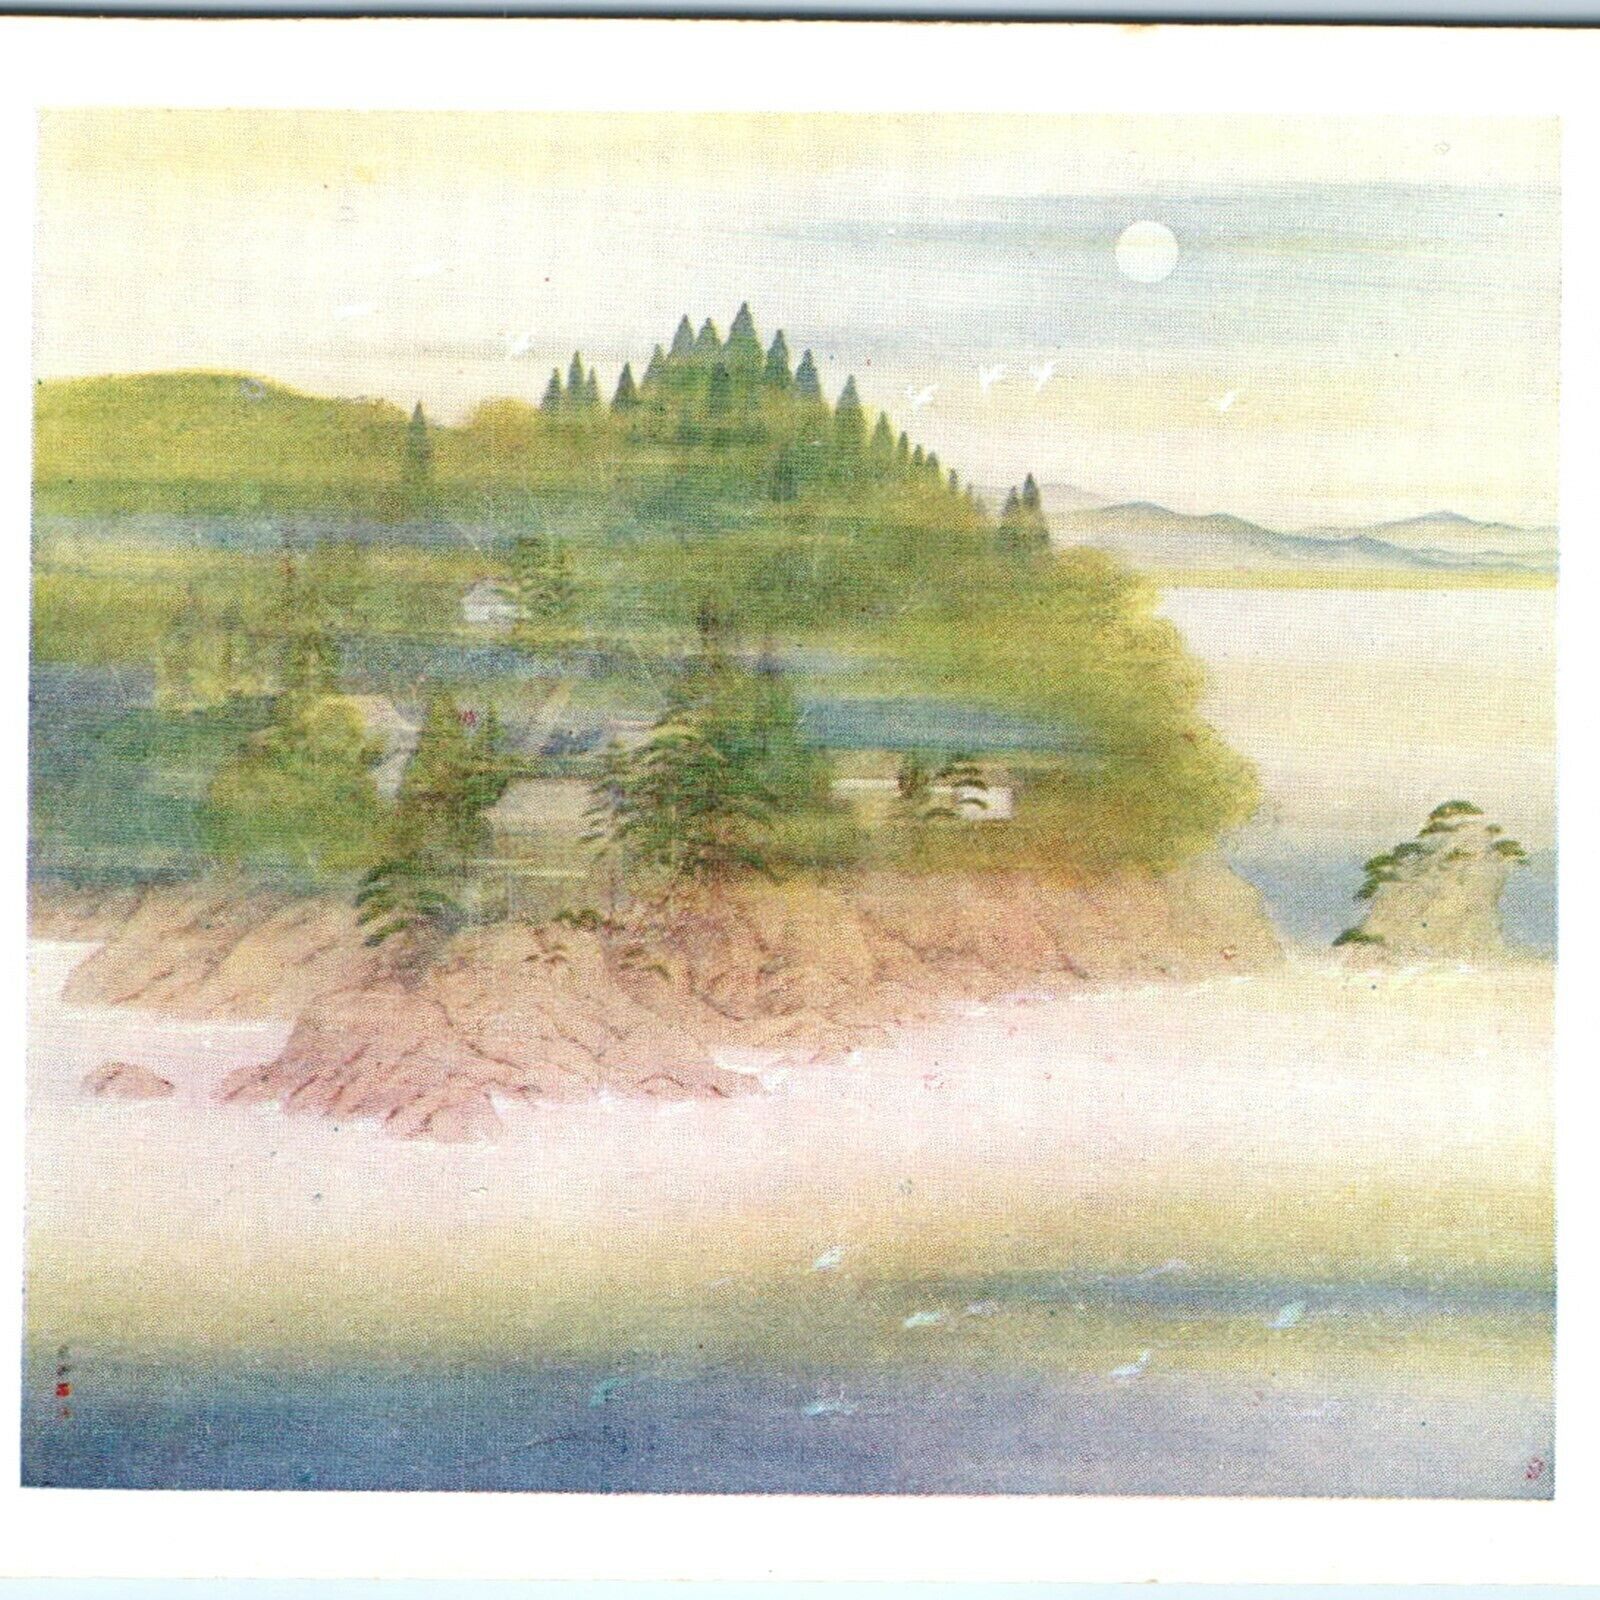 c1940s Japan Painting Unknown Landscape Art Postcard 13th Imperial Academy A59